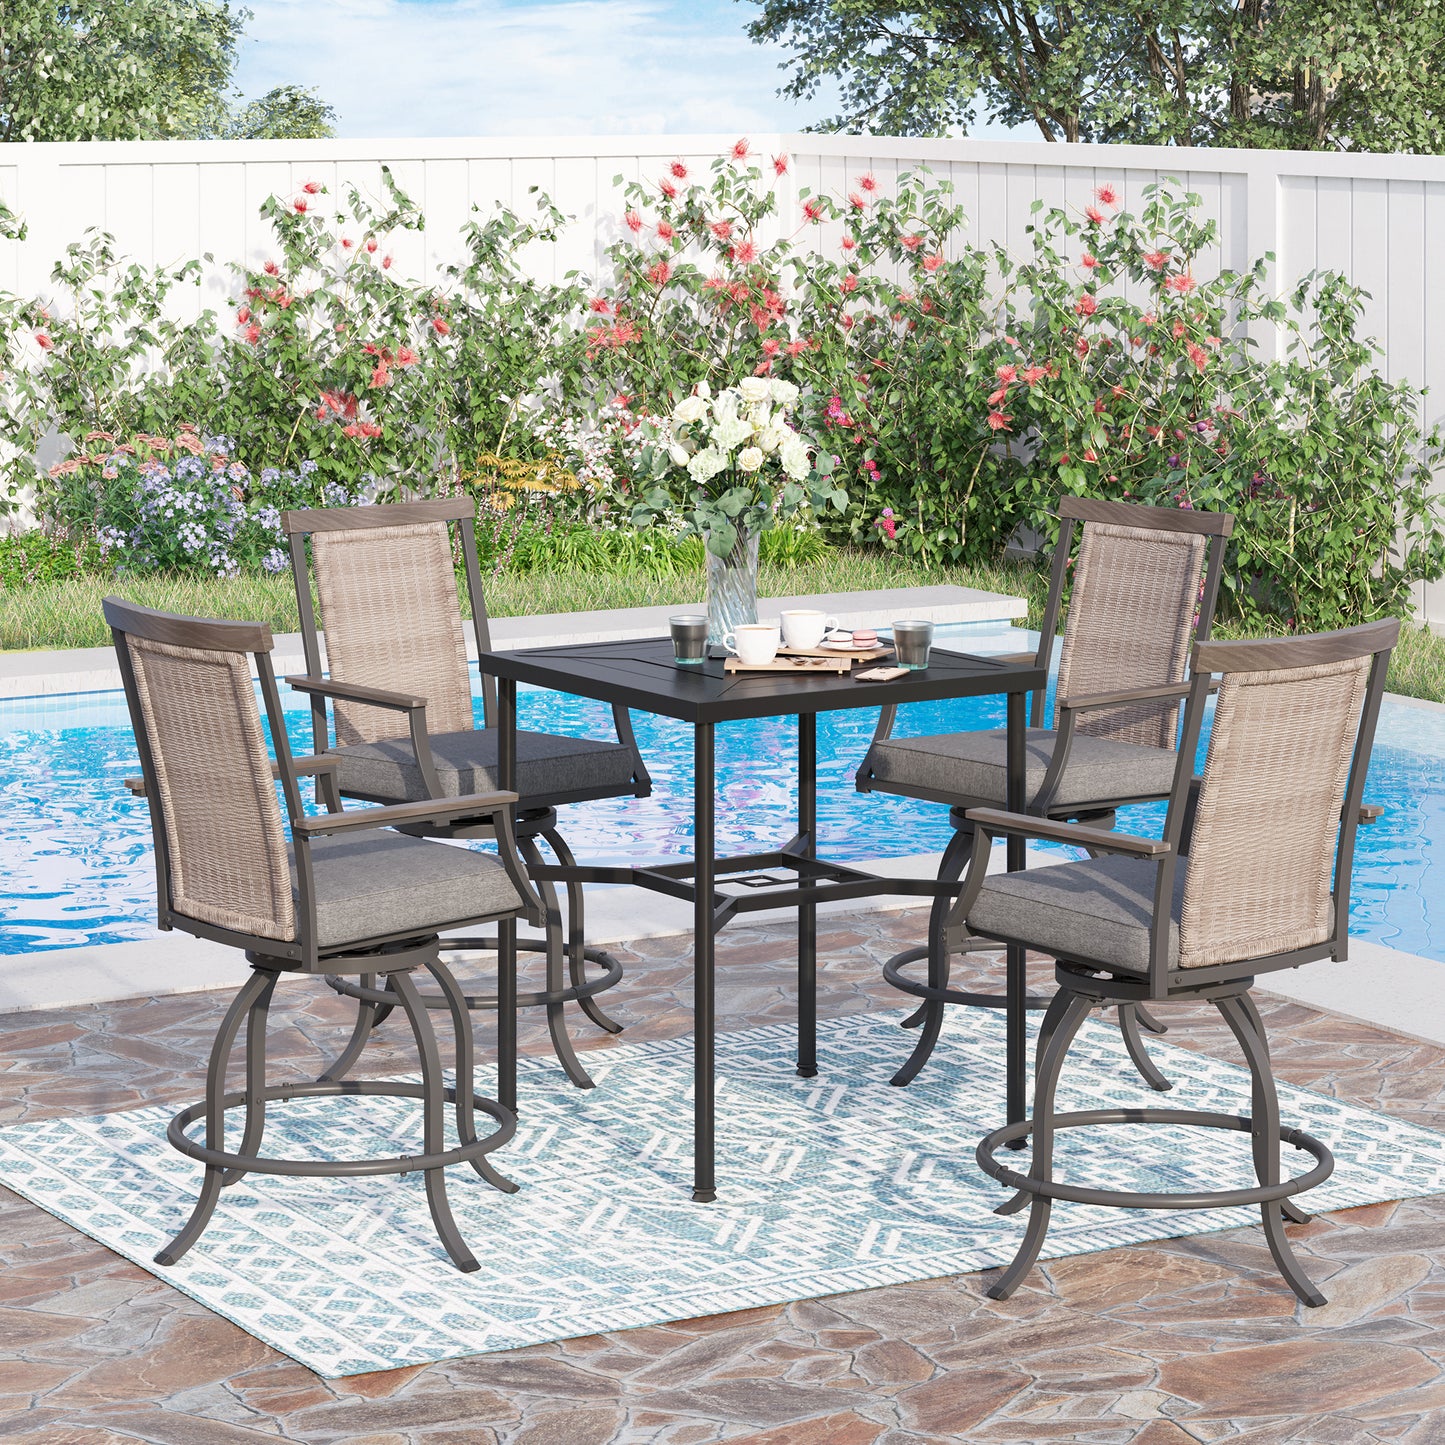 Sophia & William 5 Pieces Swivel Bar Set Rattan Backrest and Padded Cushion Bar Chair & Square Metal Table